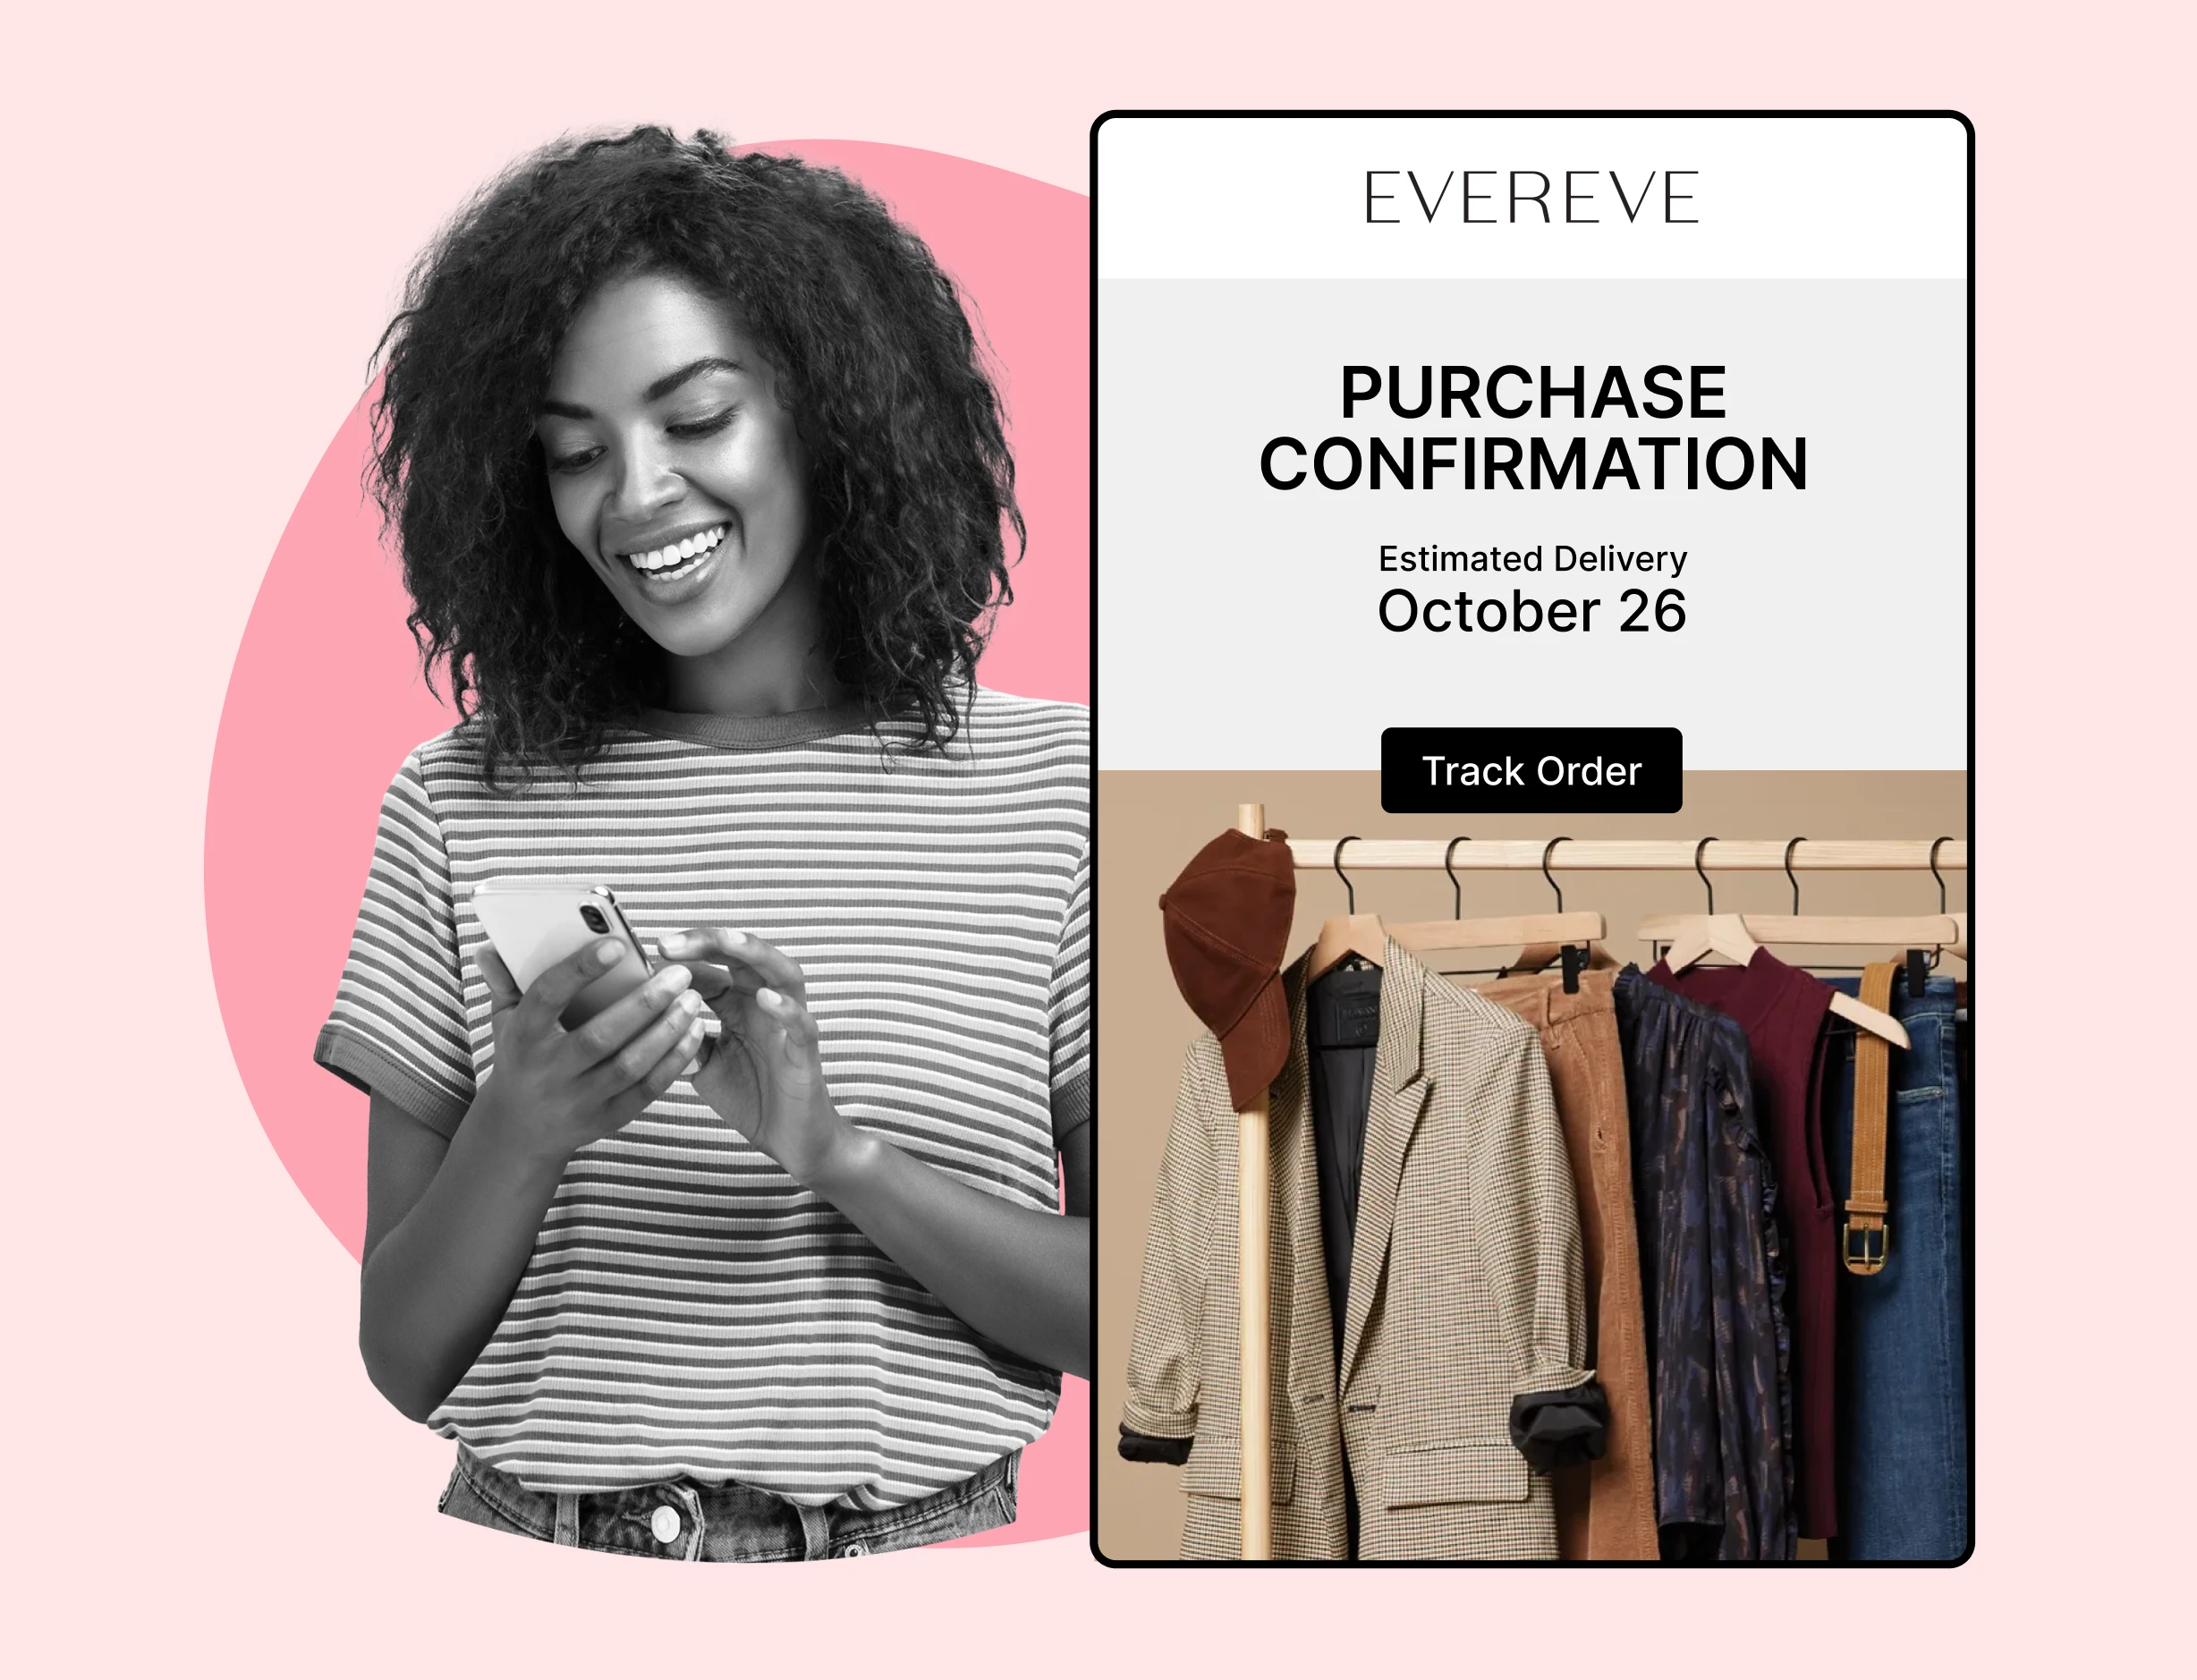 8 Proven Strategies to Convert Price Conscious Customers into Loyal Buyers